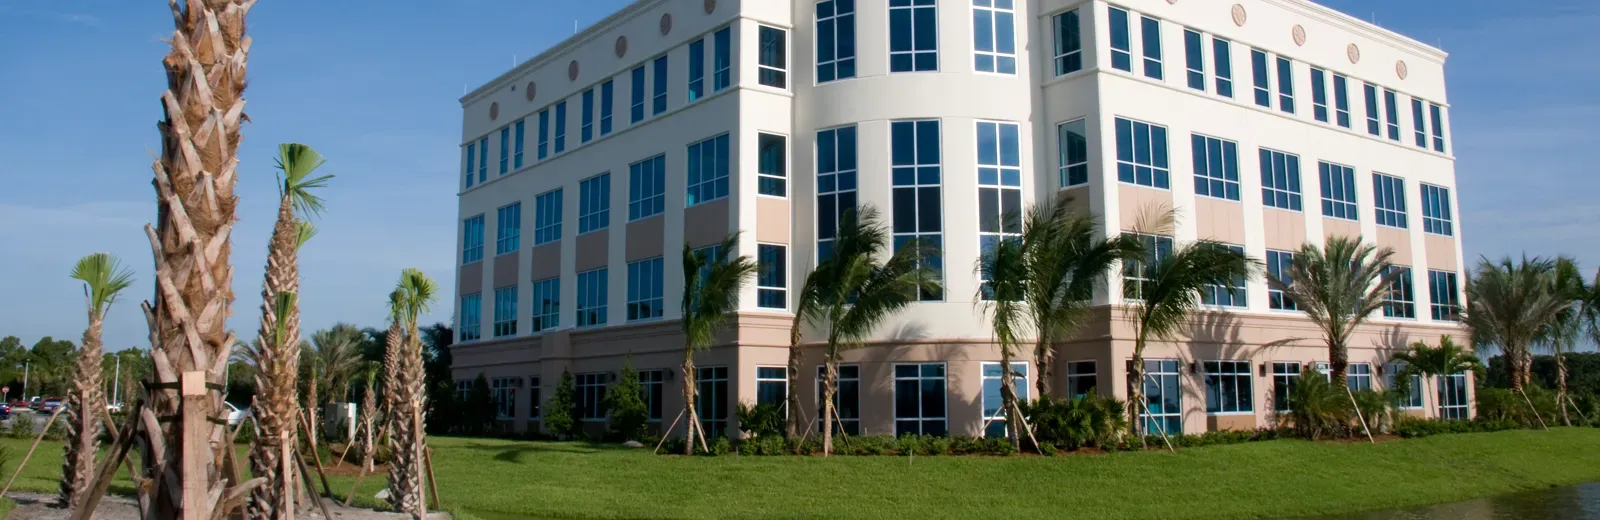 commercial building in Florida